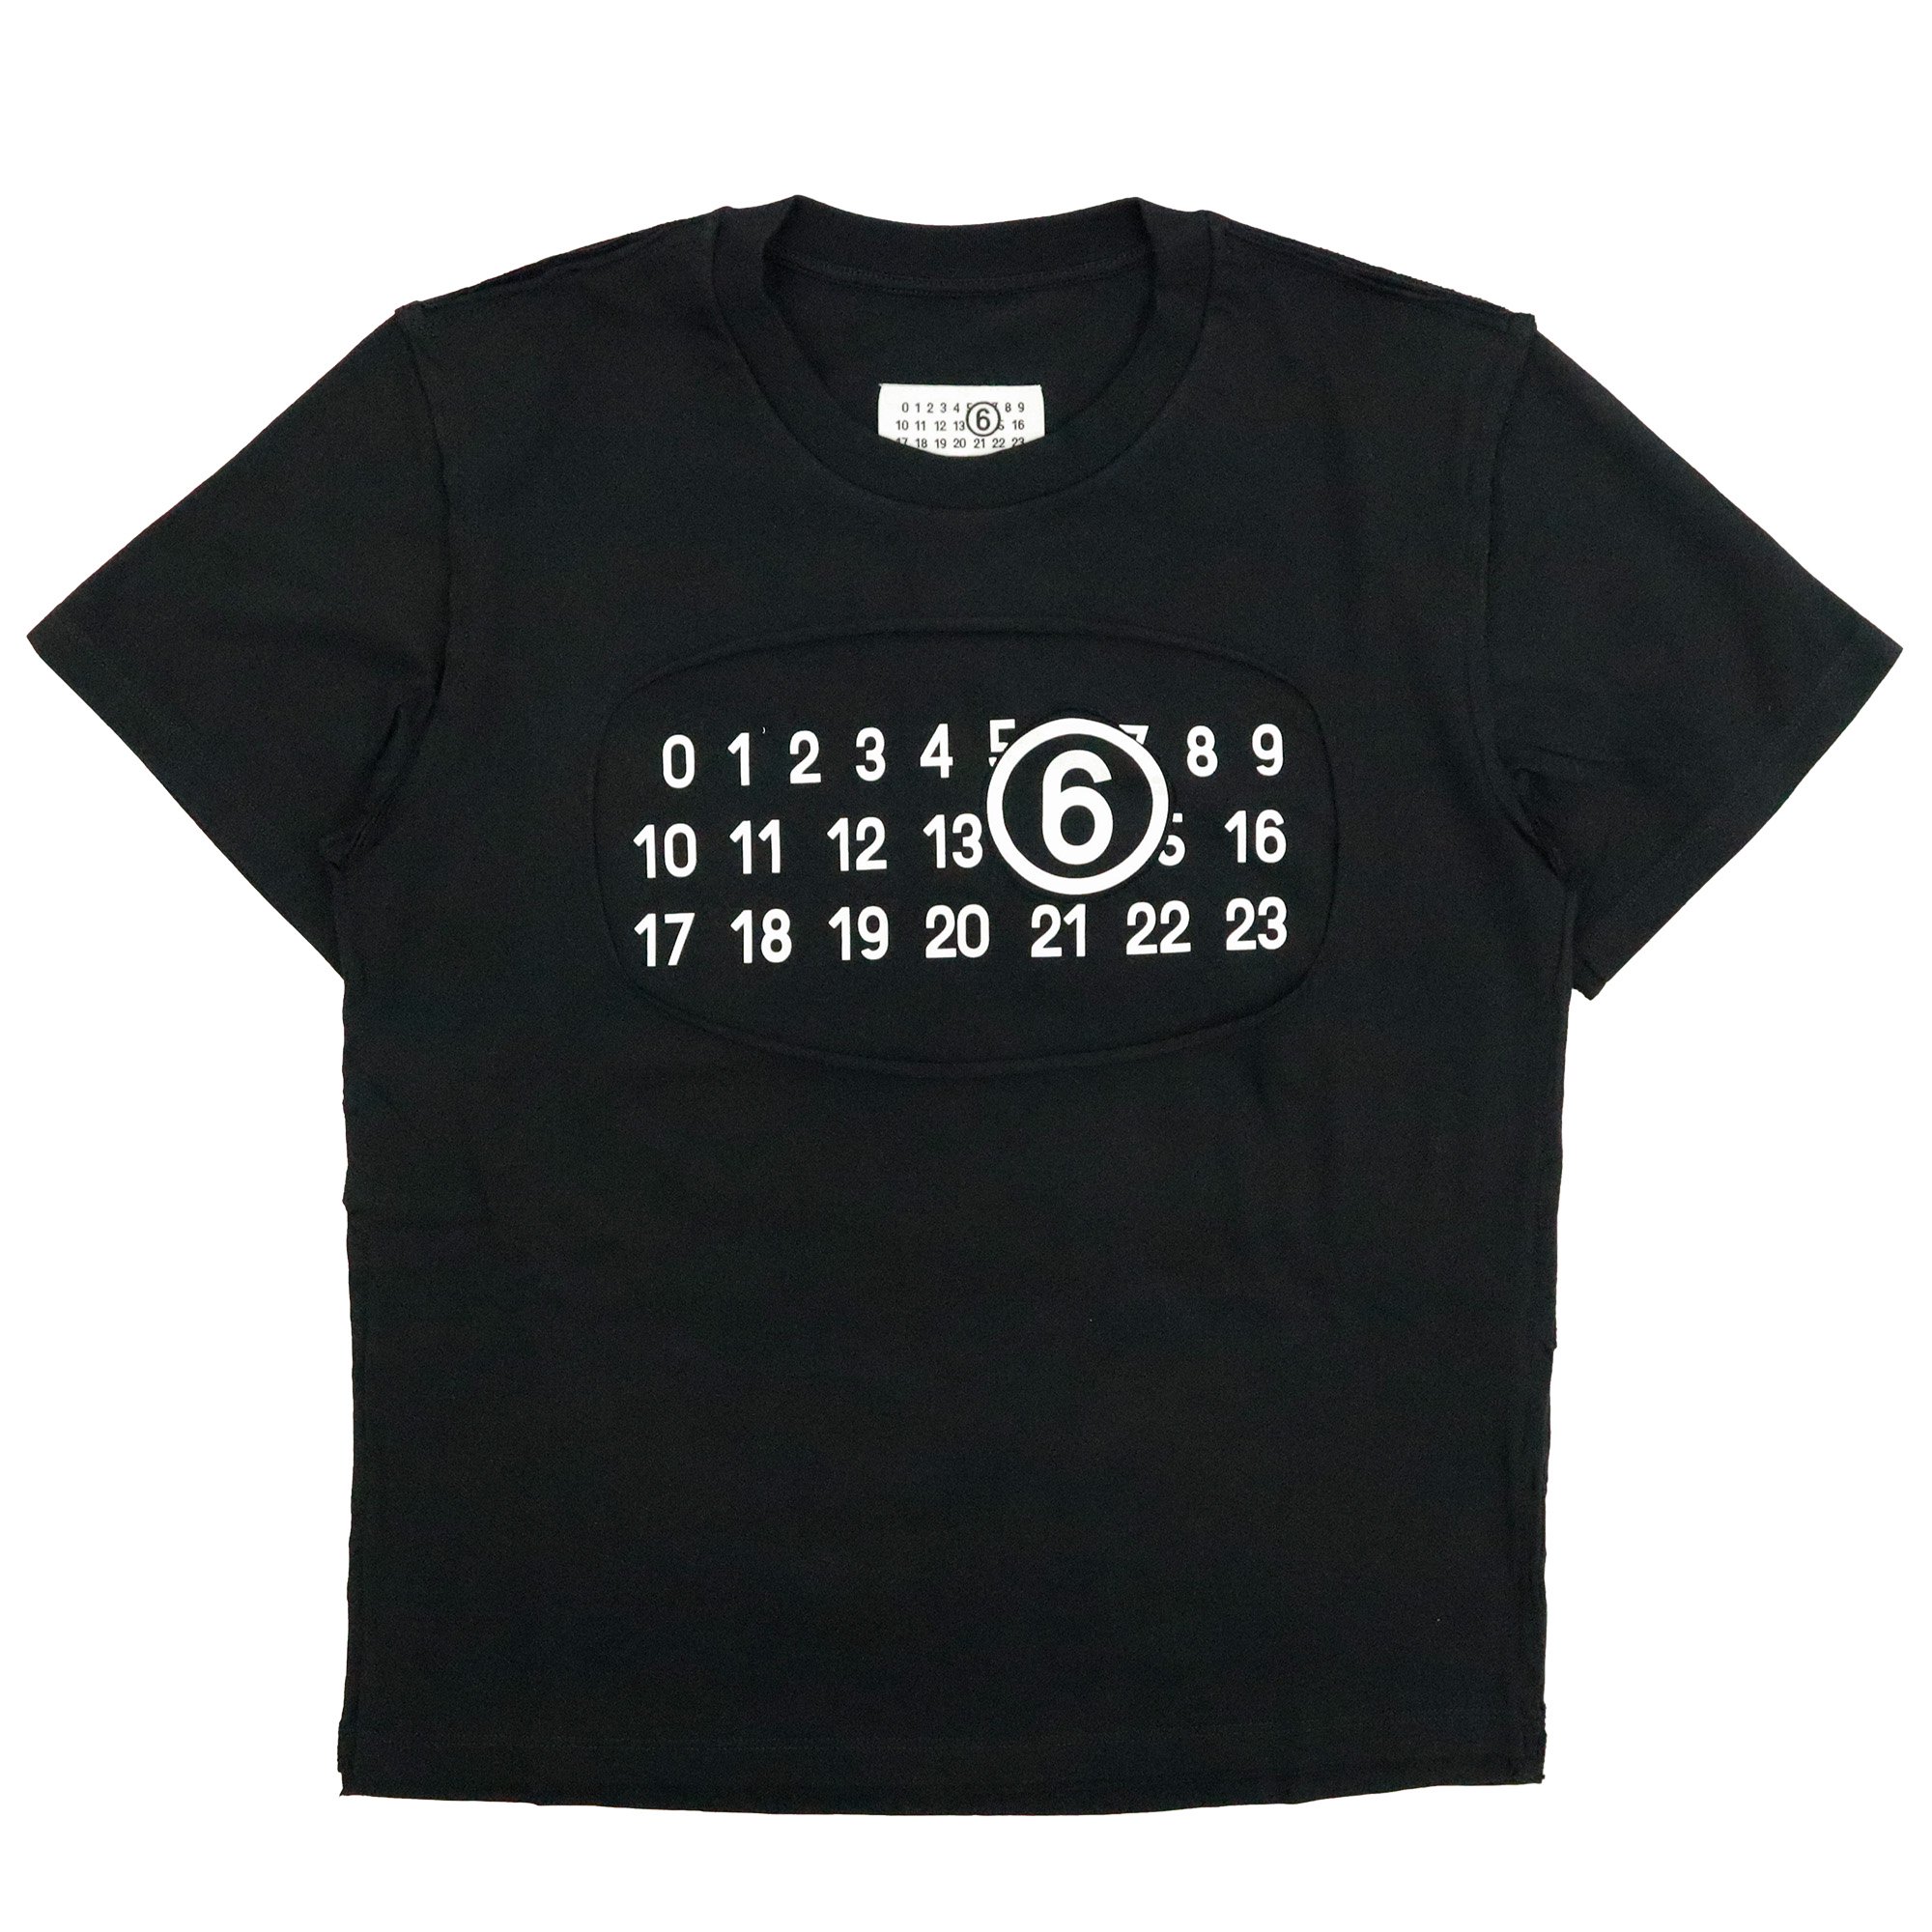 <img class='new_mark_img1' src='https://img.shop-pro.jp/img/new/icons7.gif' style='border:none;display:inline;margin:0px;padding:0px;width:auto;' />MM6 MAISON MARGIELA S/S T-SHIRT